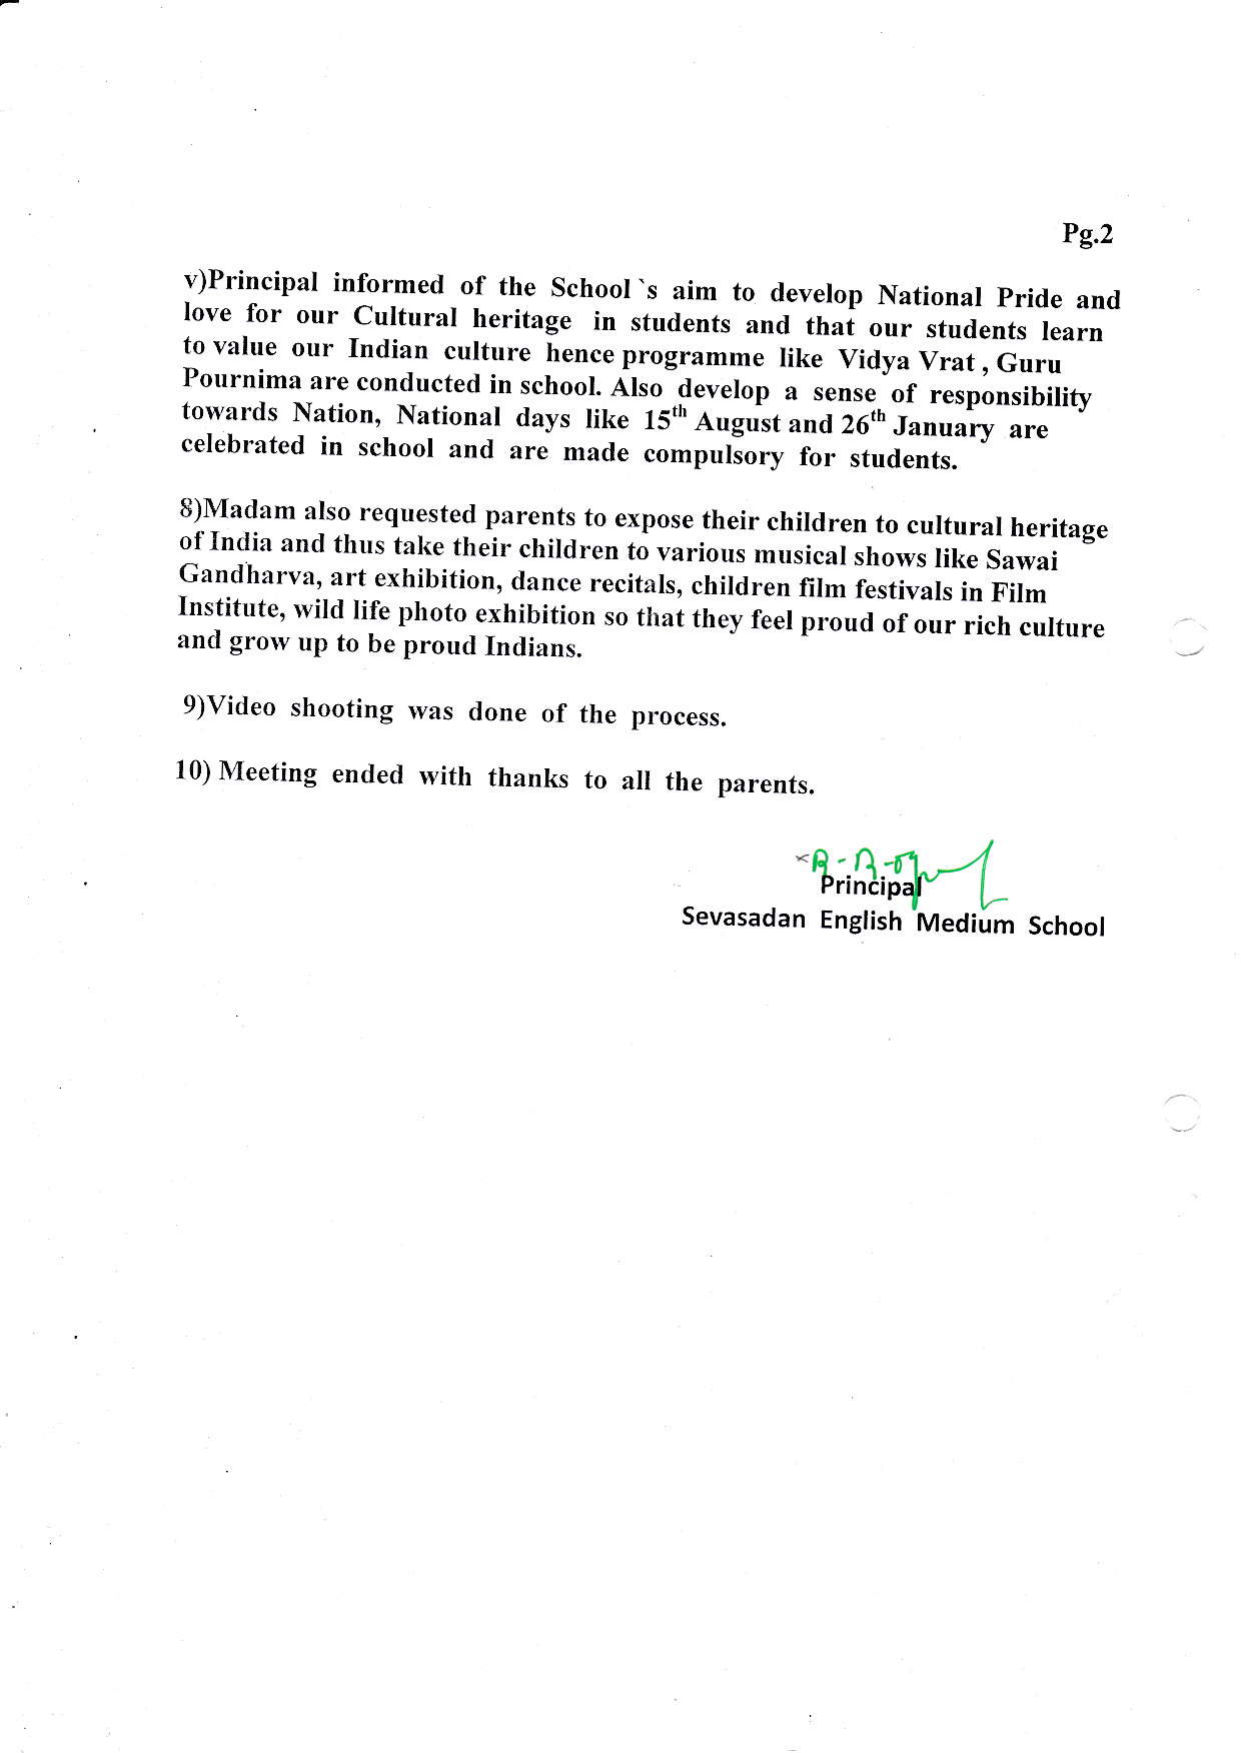 Minutes of General Body Meeting Held on 30/07/2019 page 2 